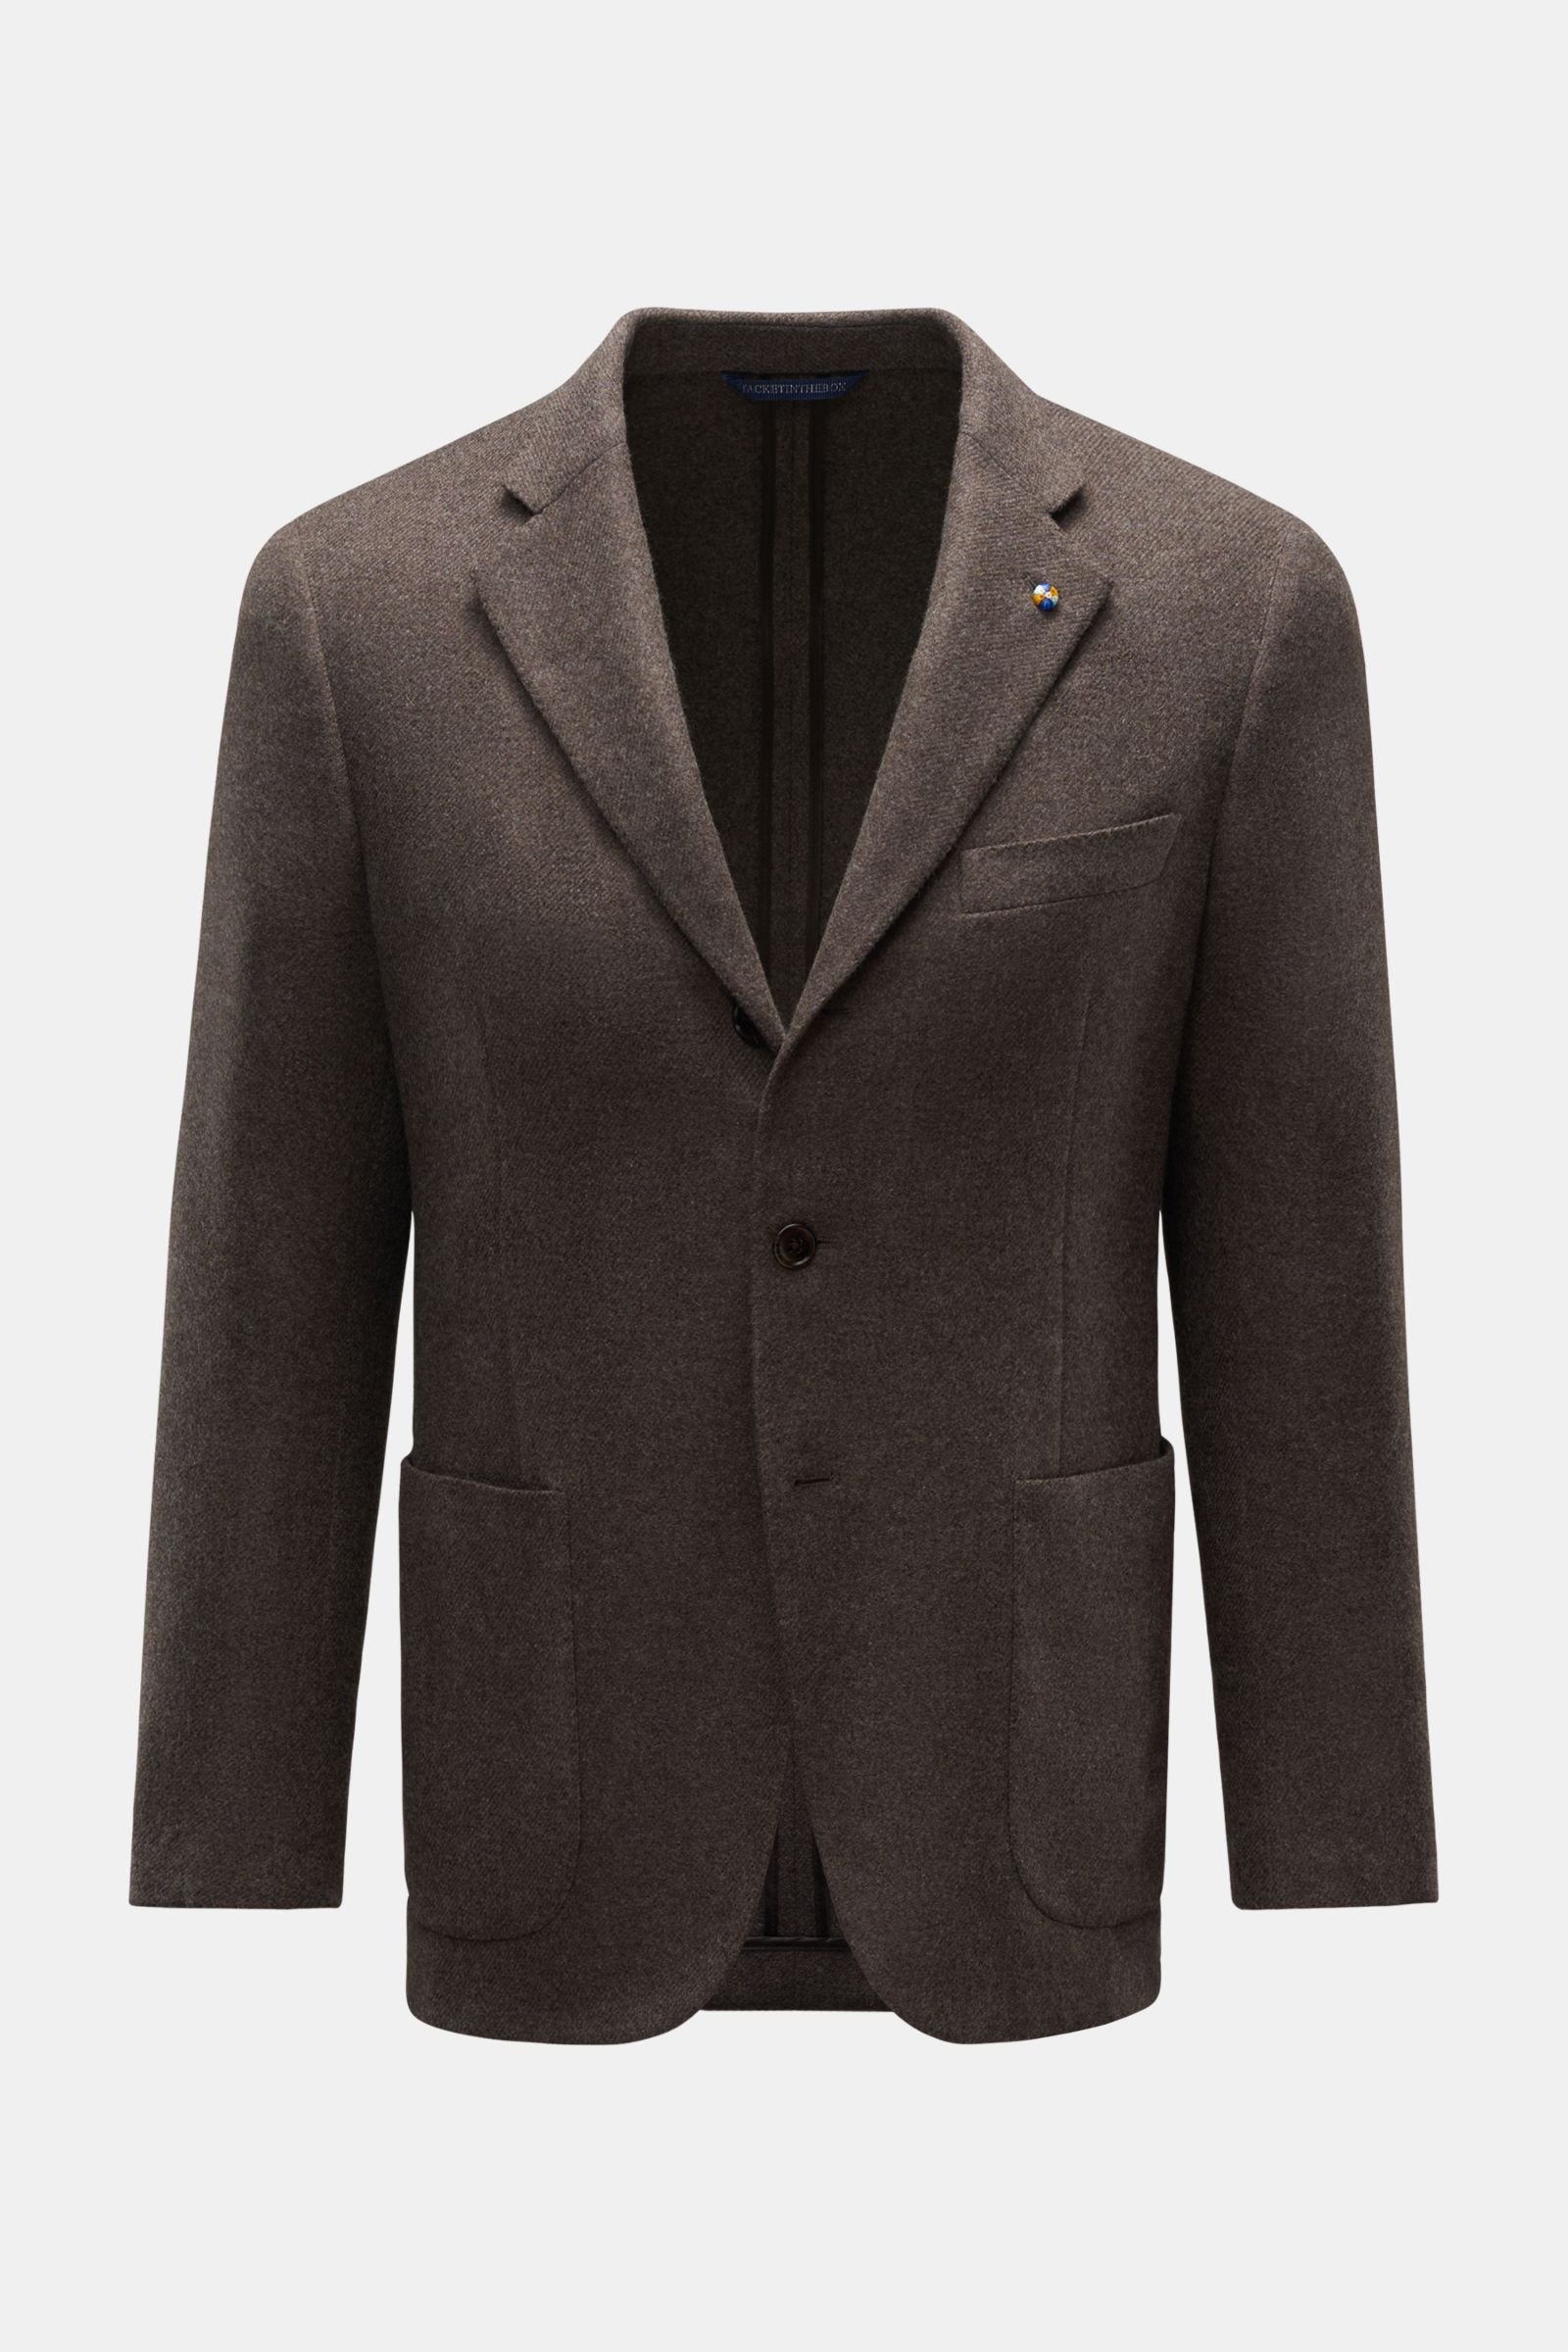 Cashmere smart-casual jacket grey-brown